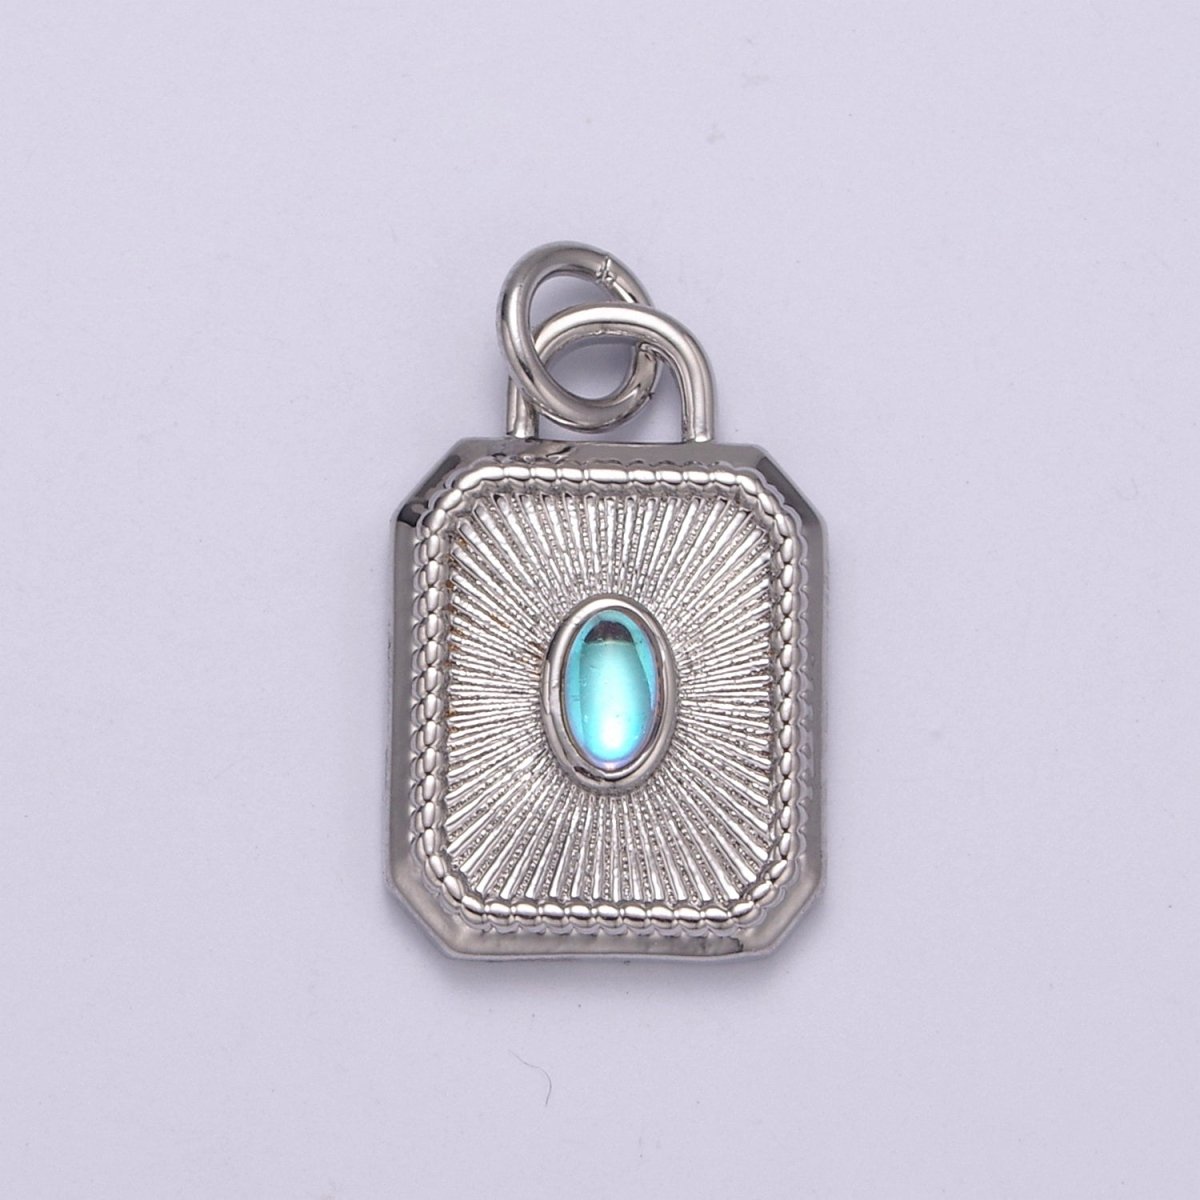 14k Gold filled Charm Geometric Tag Tile rectangle charm w/ Moonstone Medallion pendant, Necklace supply, Jewelry makings N-209 N-210 - DLUXCA